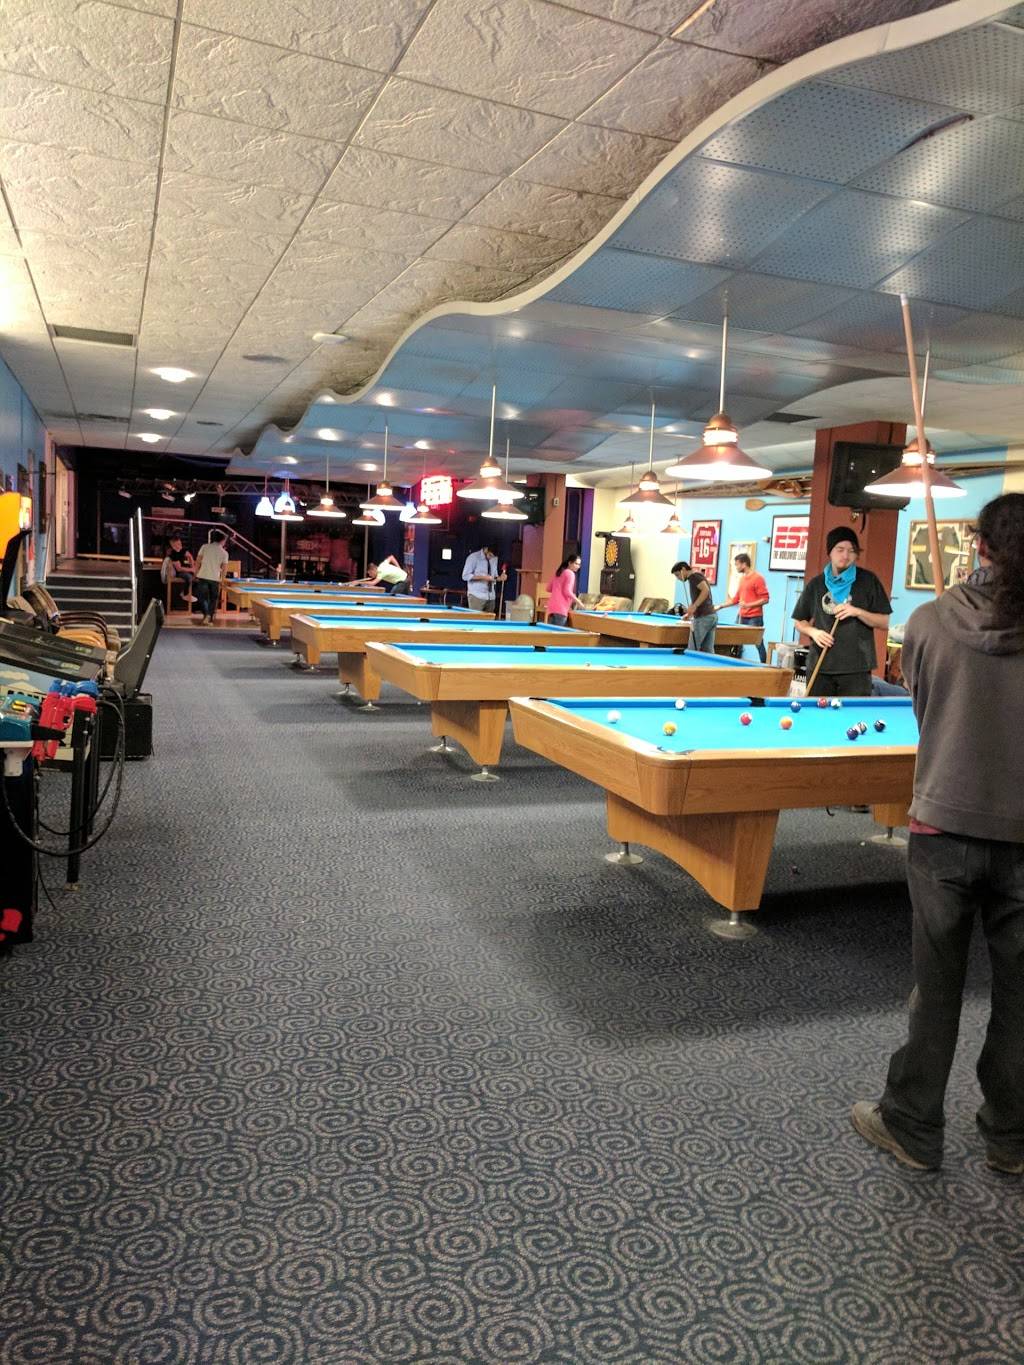 RITZ Sports Zone | restaurant | 1 Lomb Memorial Dr, Rochester, NY 14623, USA | 5854752411 OR +1 585-475-2411